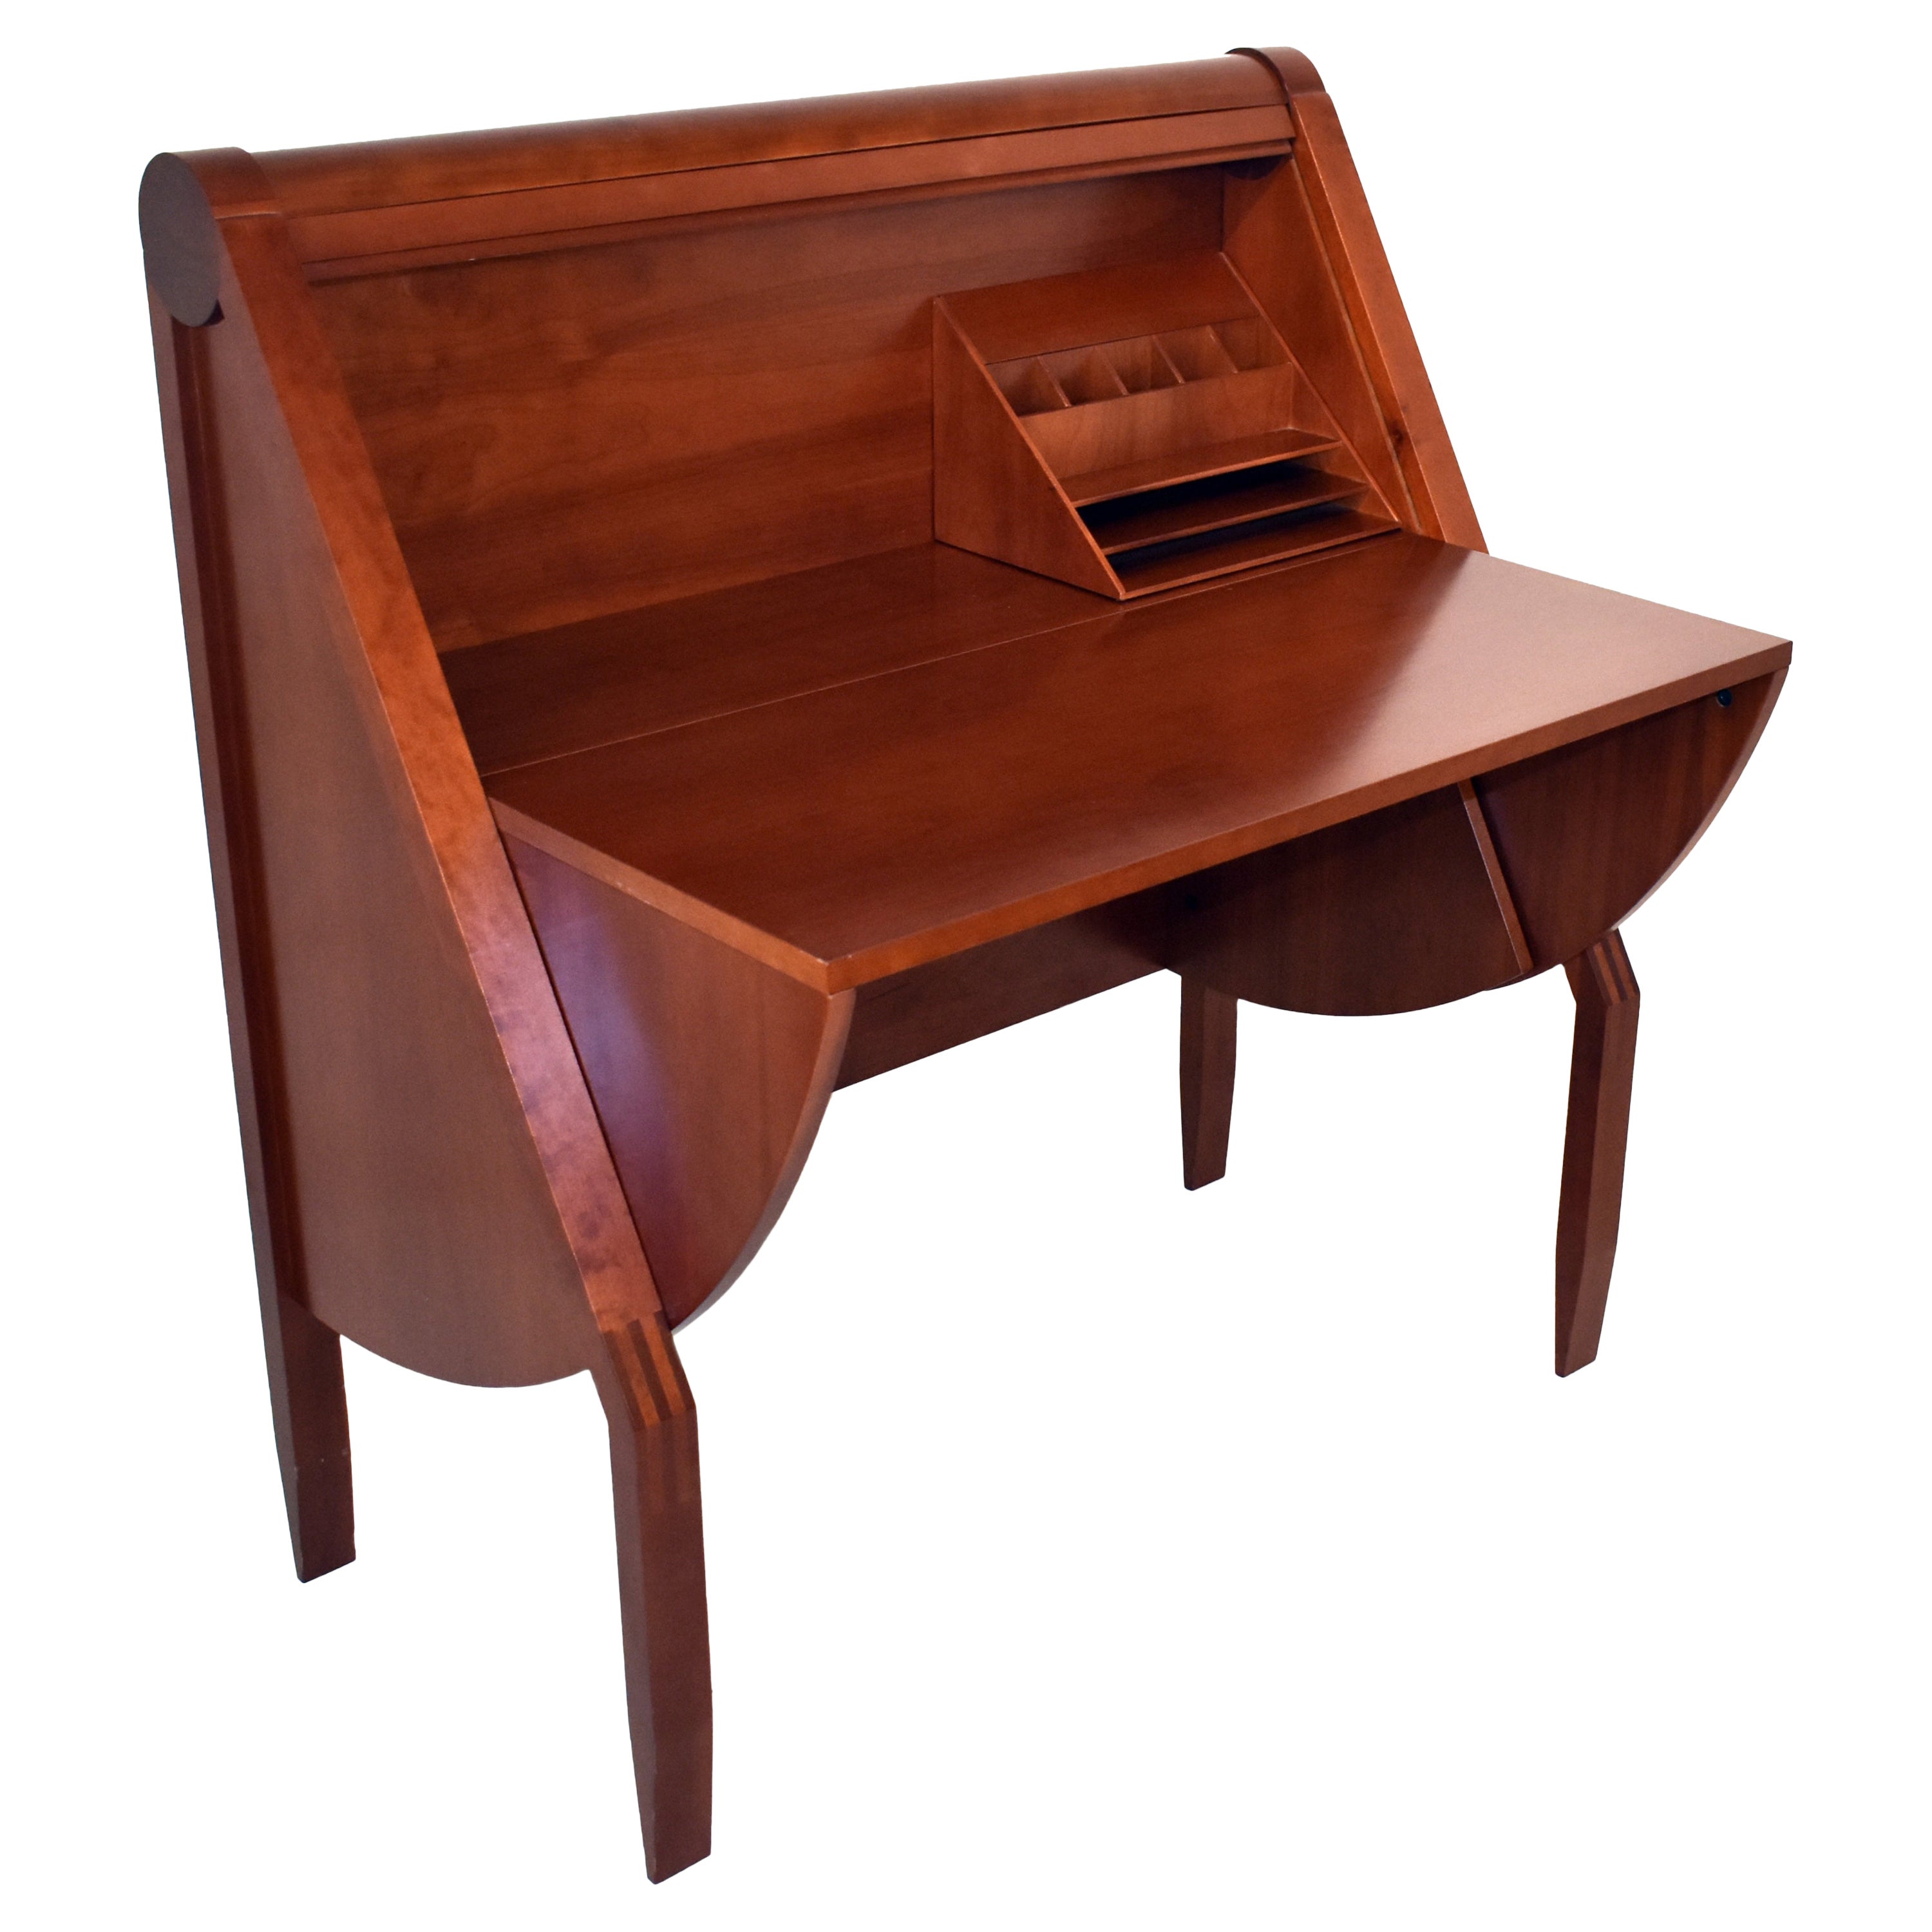 Compass Writing Desk Bureau by Pedro Miralles Claver for Punt Mobles, circa 1990 For Sale